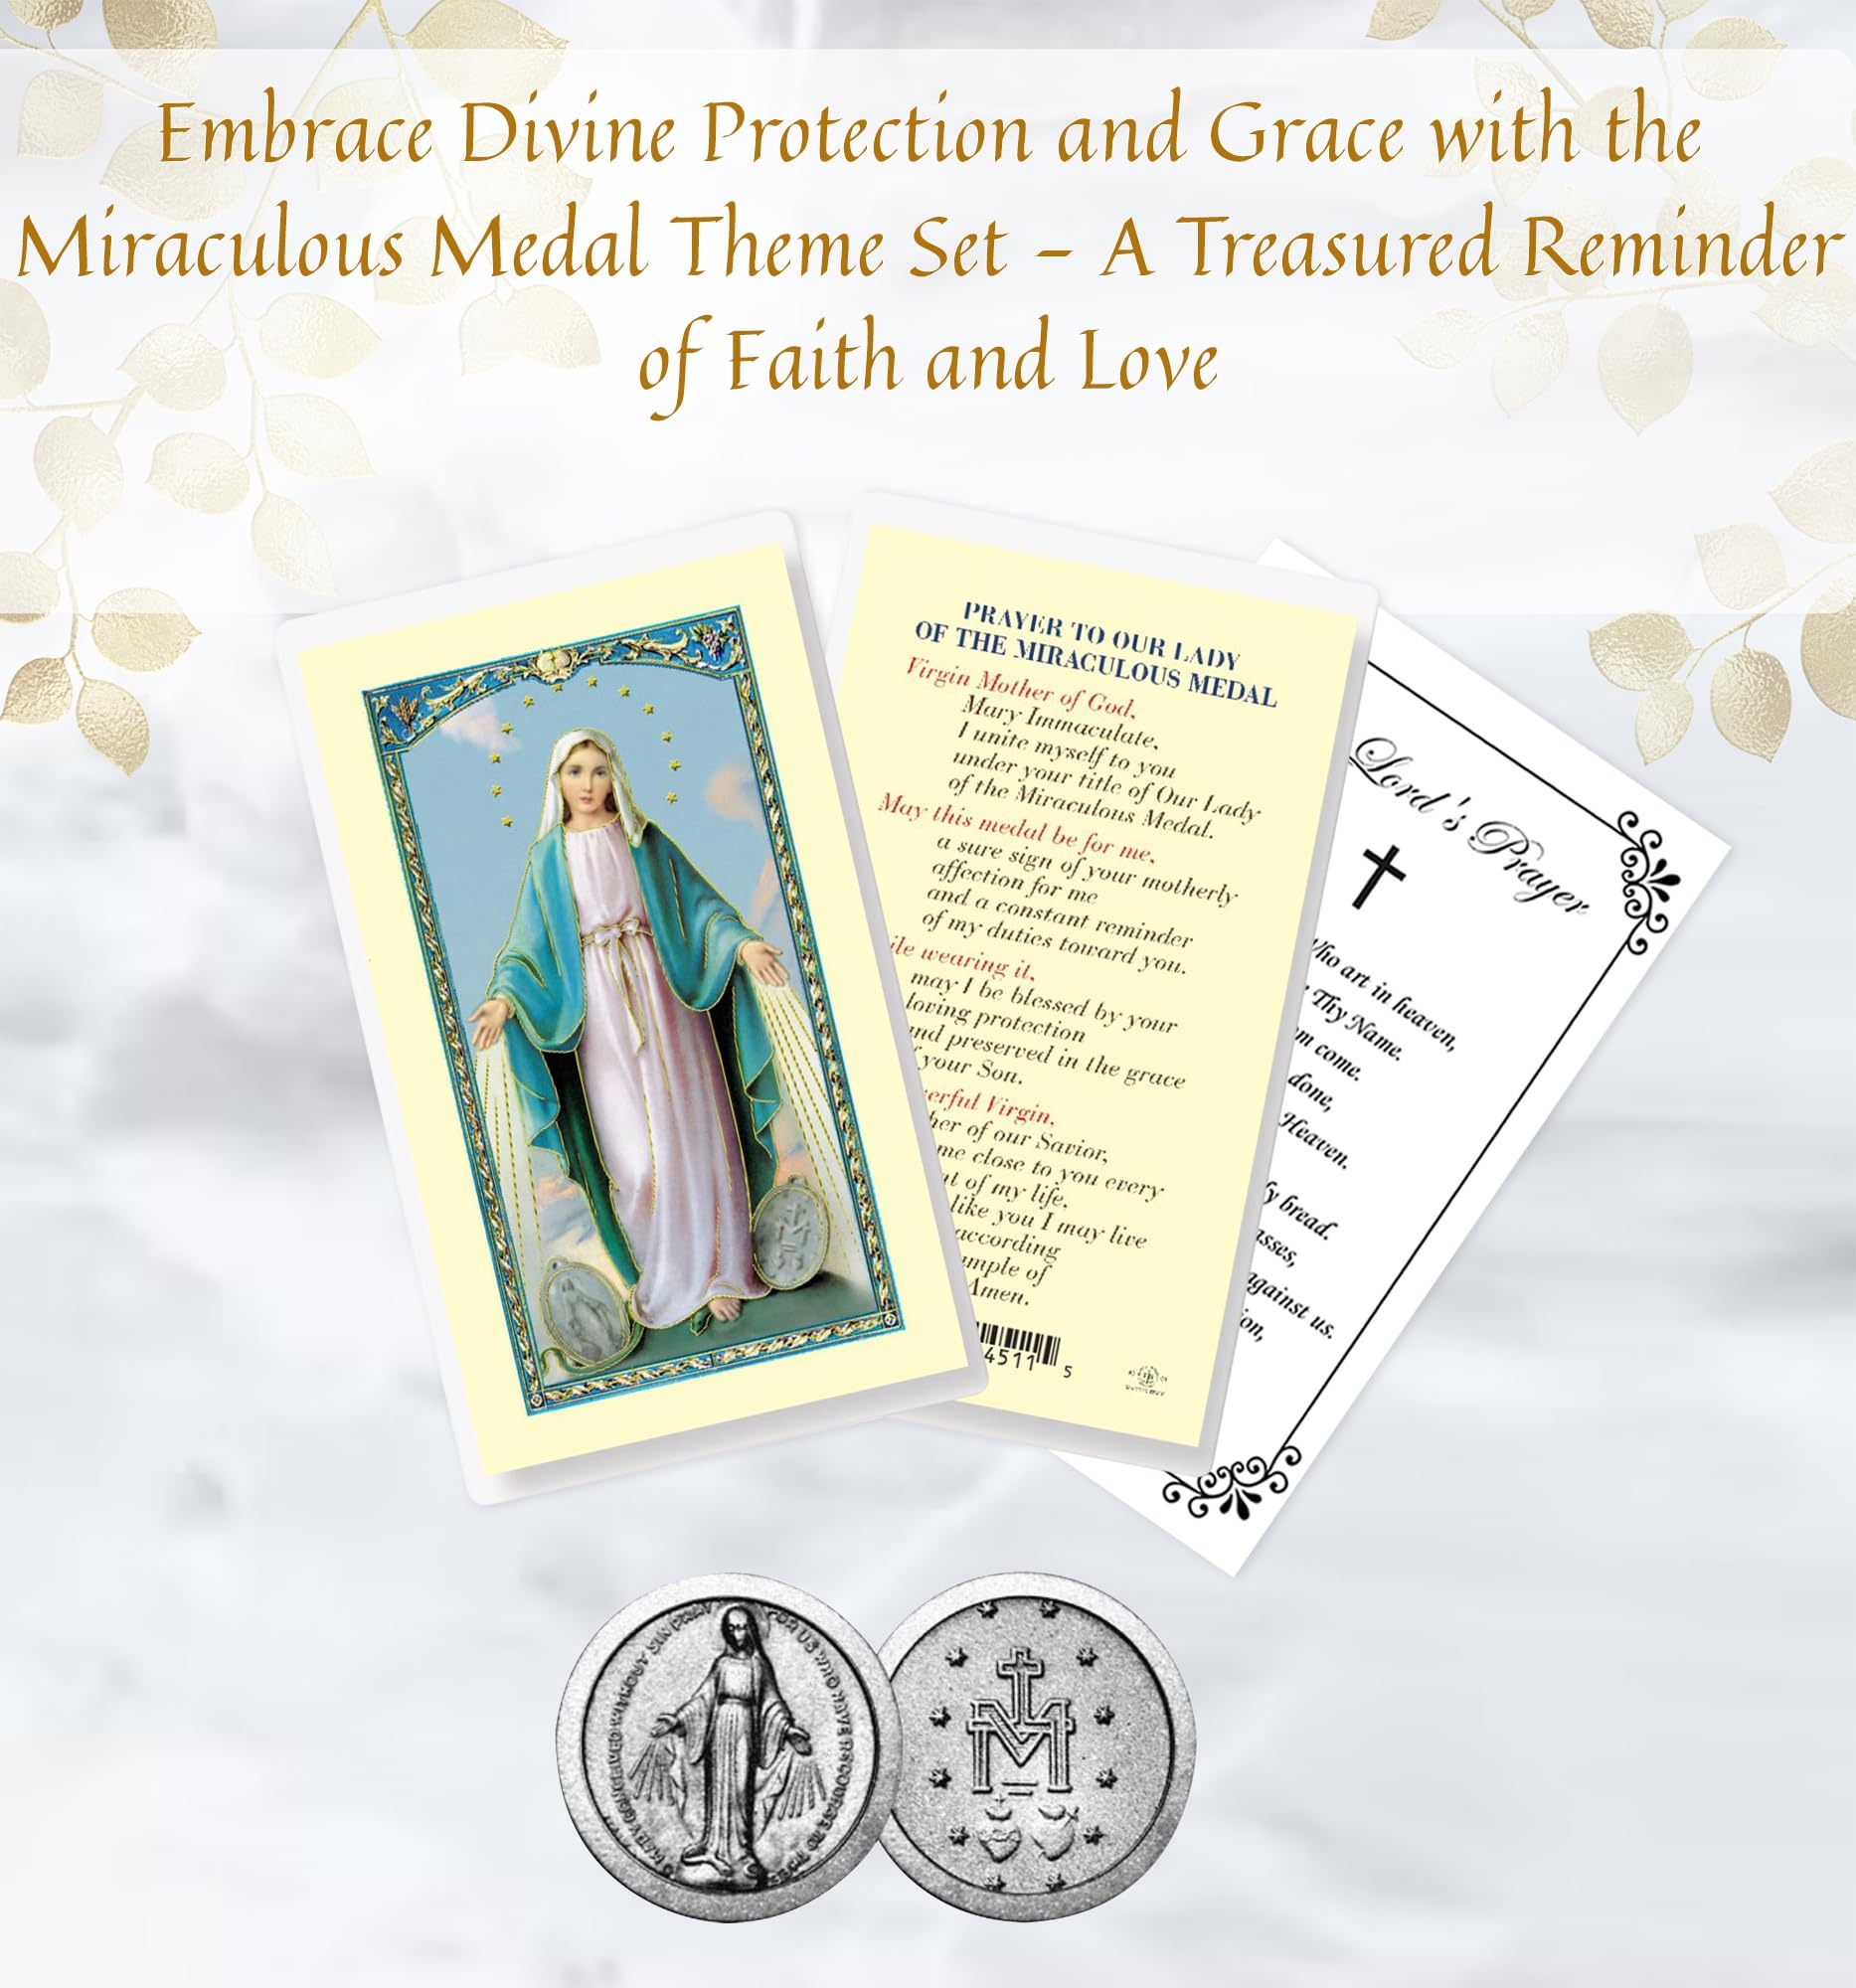 Laminated Miraculous Medal Prayer Card Miraculous Medal Pocket Token The Lord s Prayer Card Double Sided Virgin Mary Prayer Card Miraculous Medal Coin Theme Set Of 3 Items Office Products Amazon